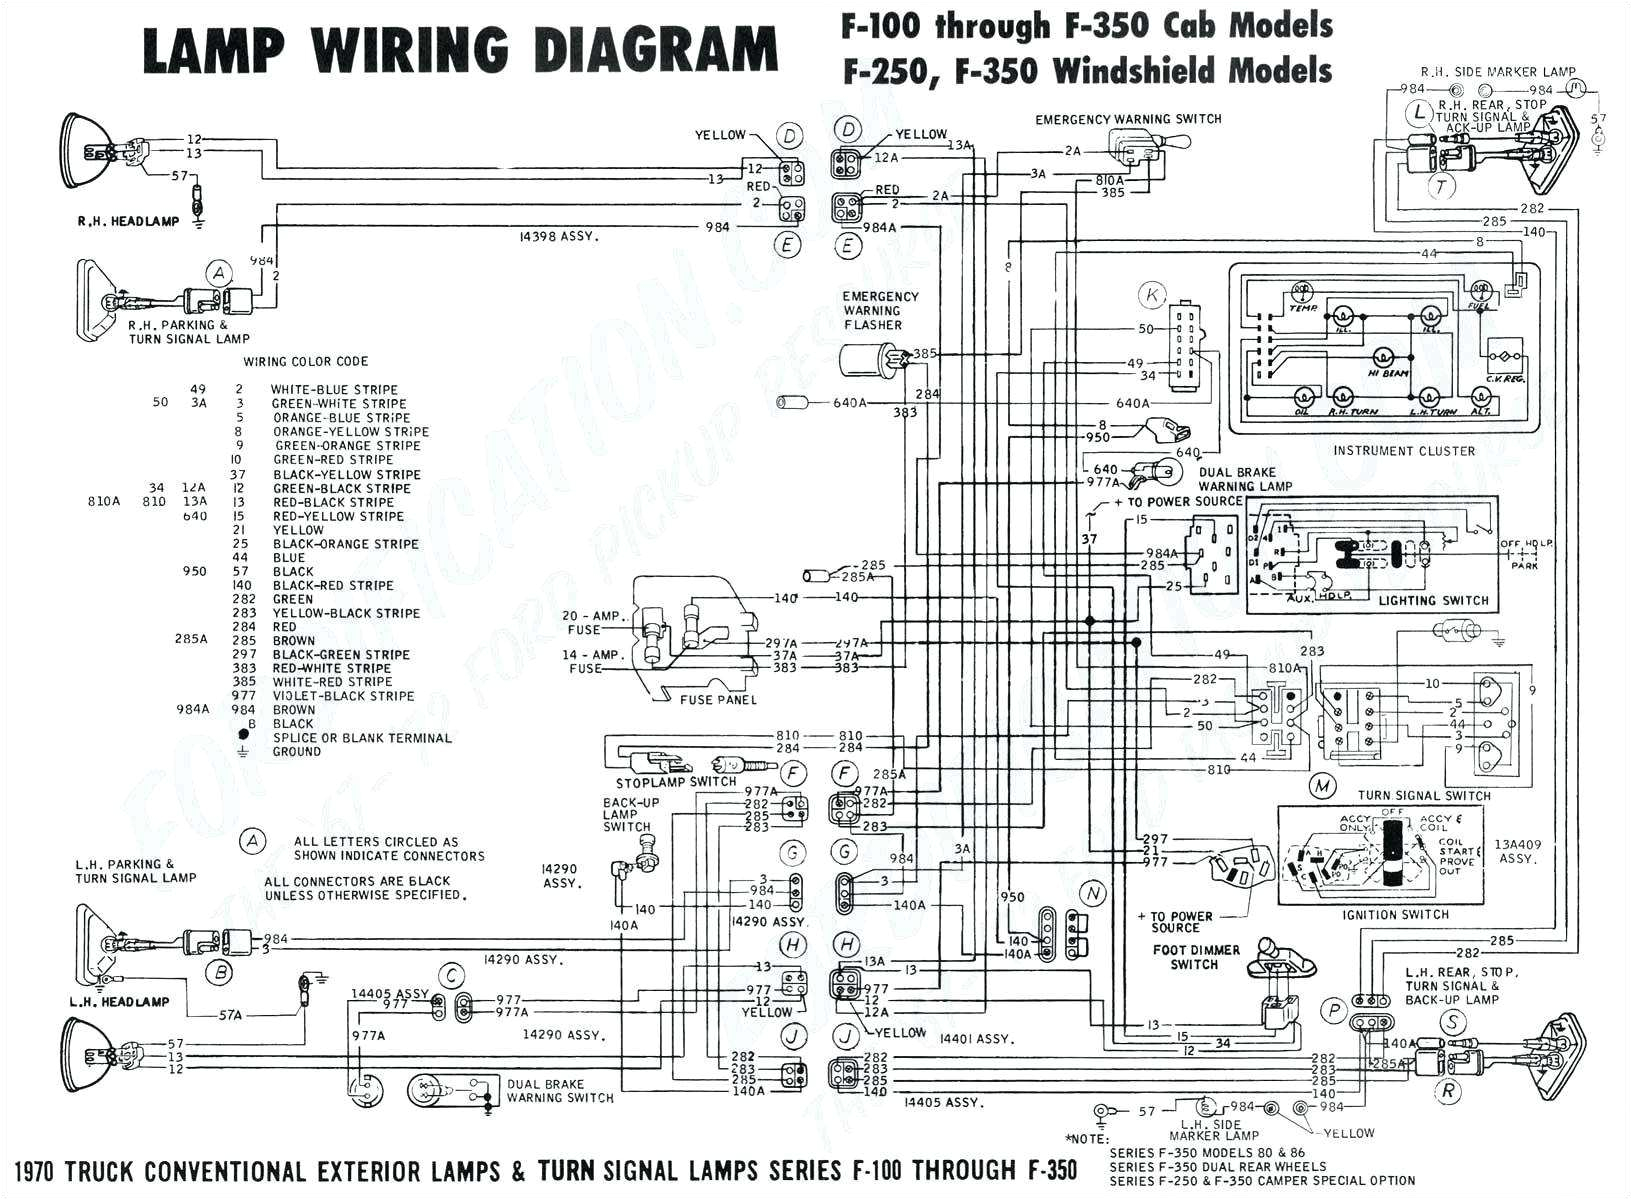 vw pickup fuse diagram wiring diagram 2004 vw golf fuel pump relay location furthermore vw bus 1972 wiring